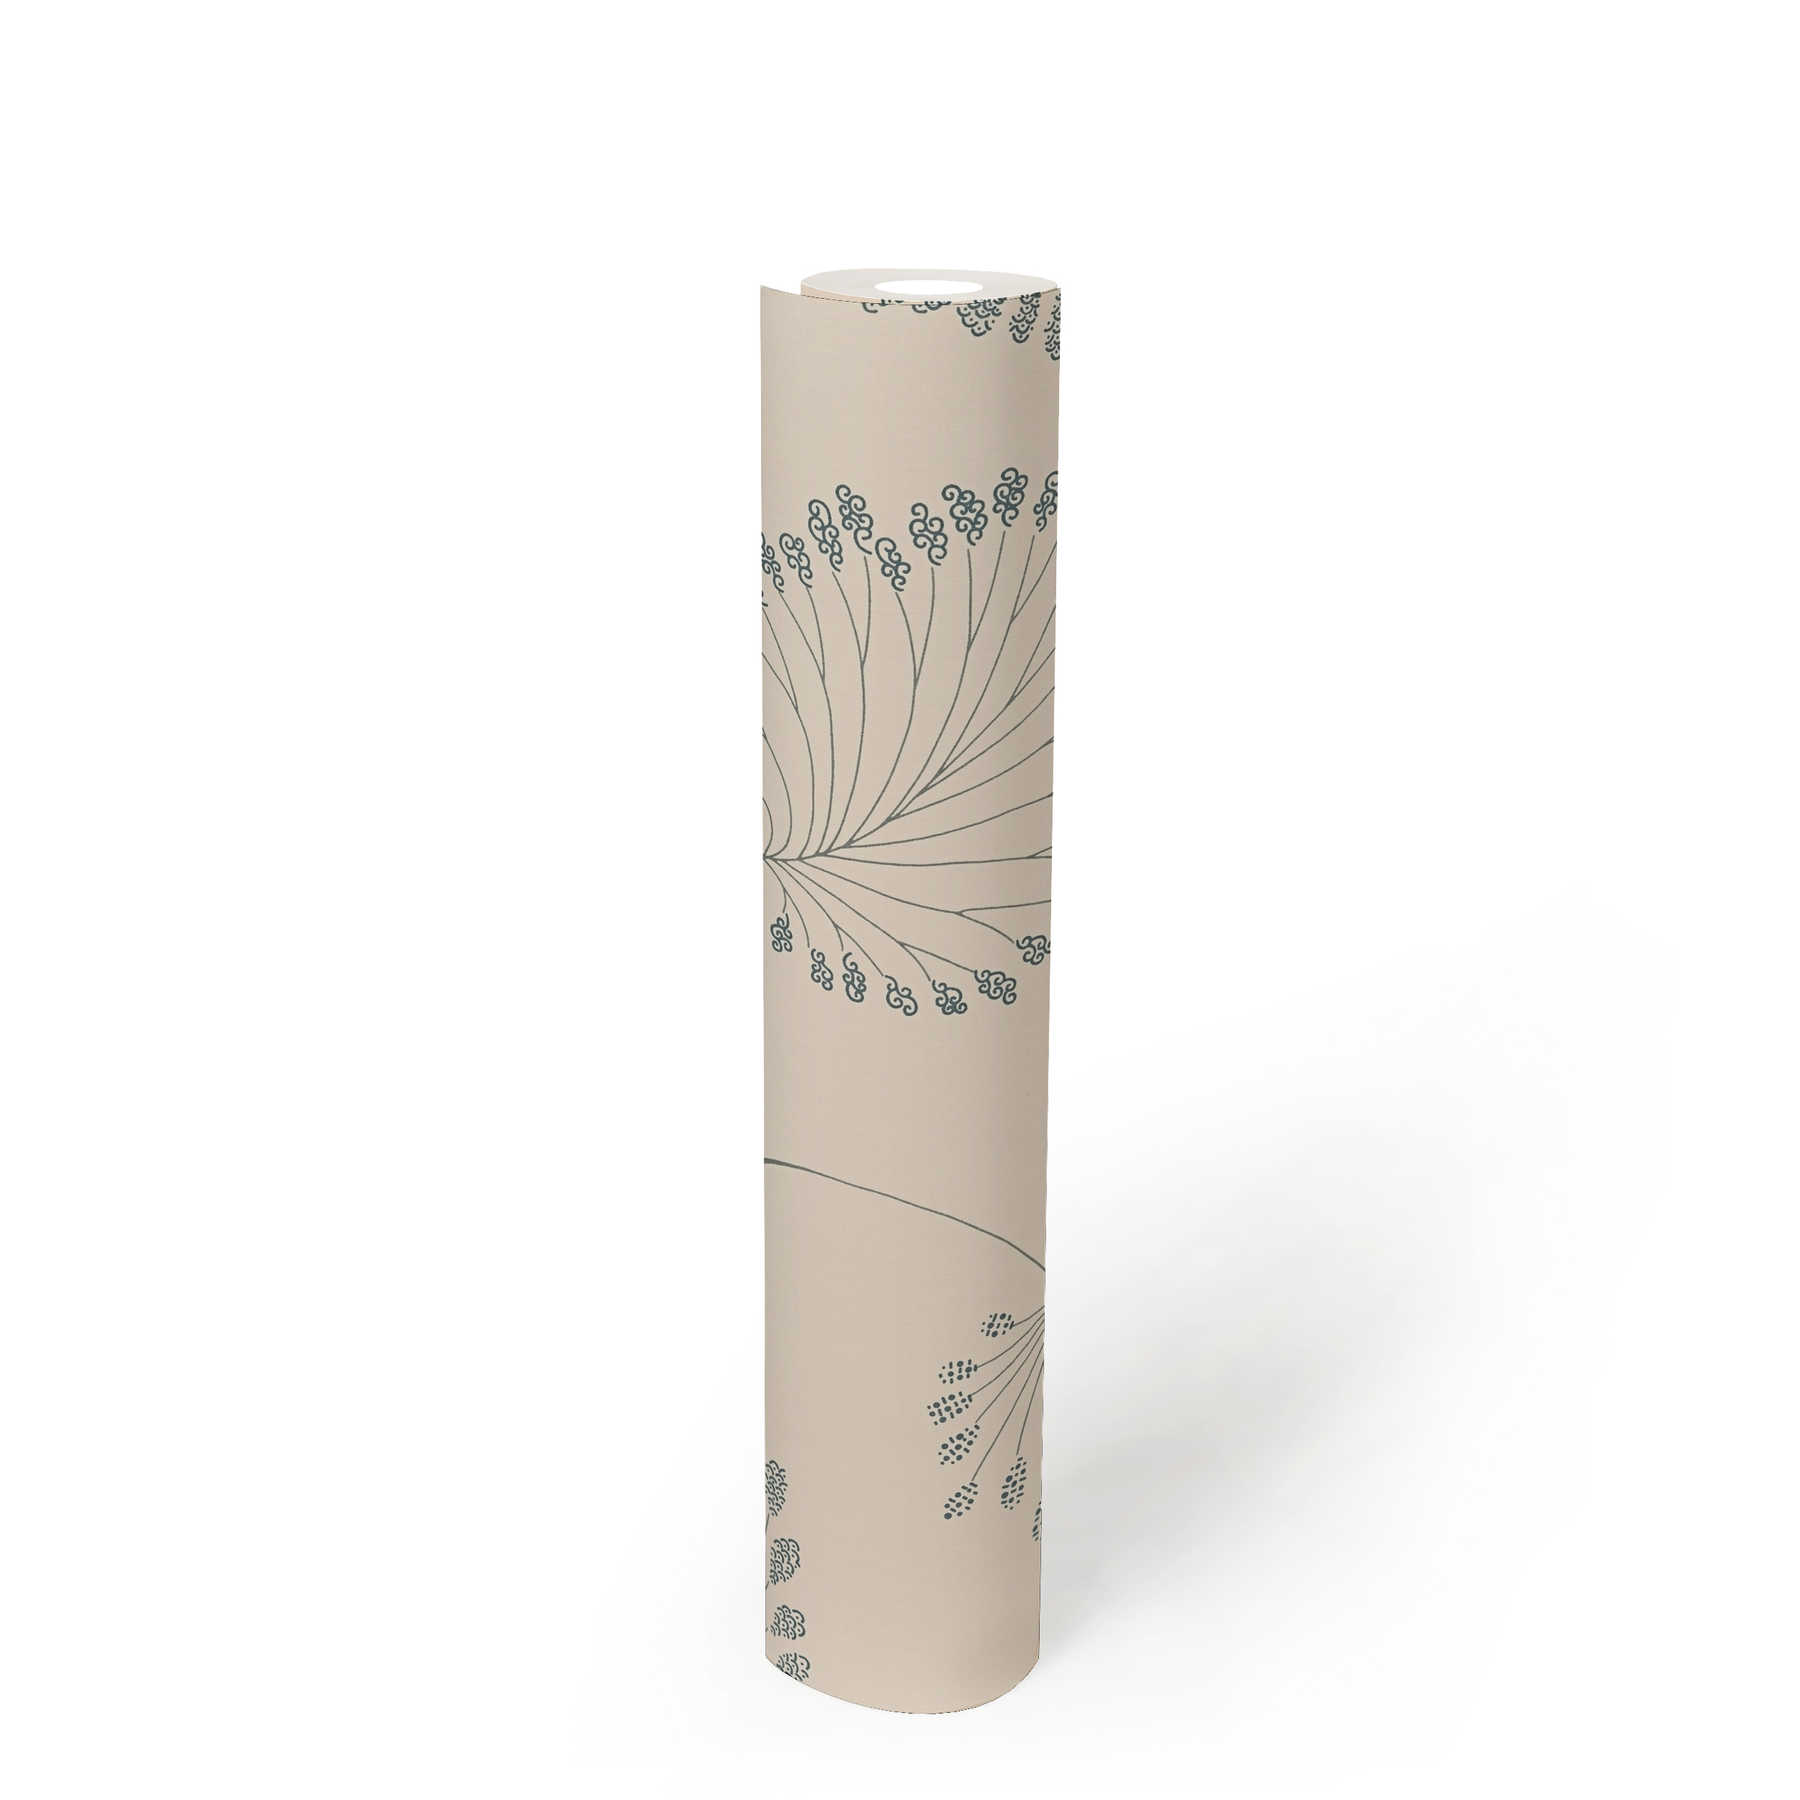             Wallpaper leaf motif abstract with metallic accents - beige, grey
        